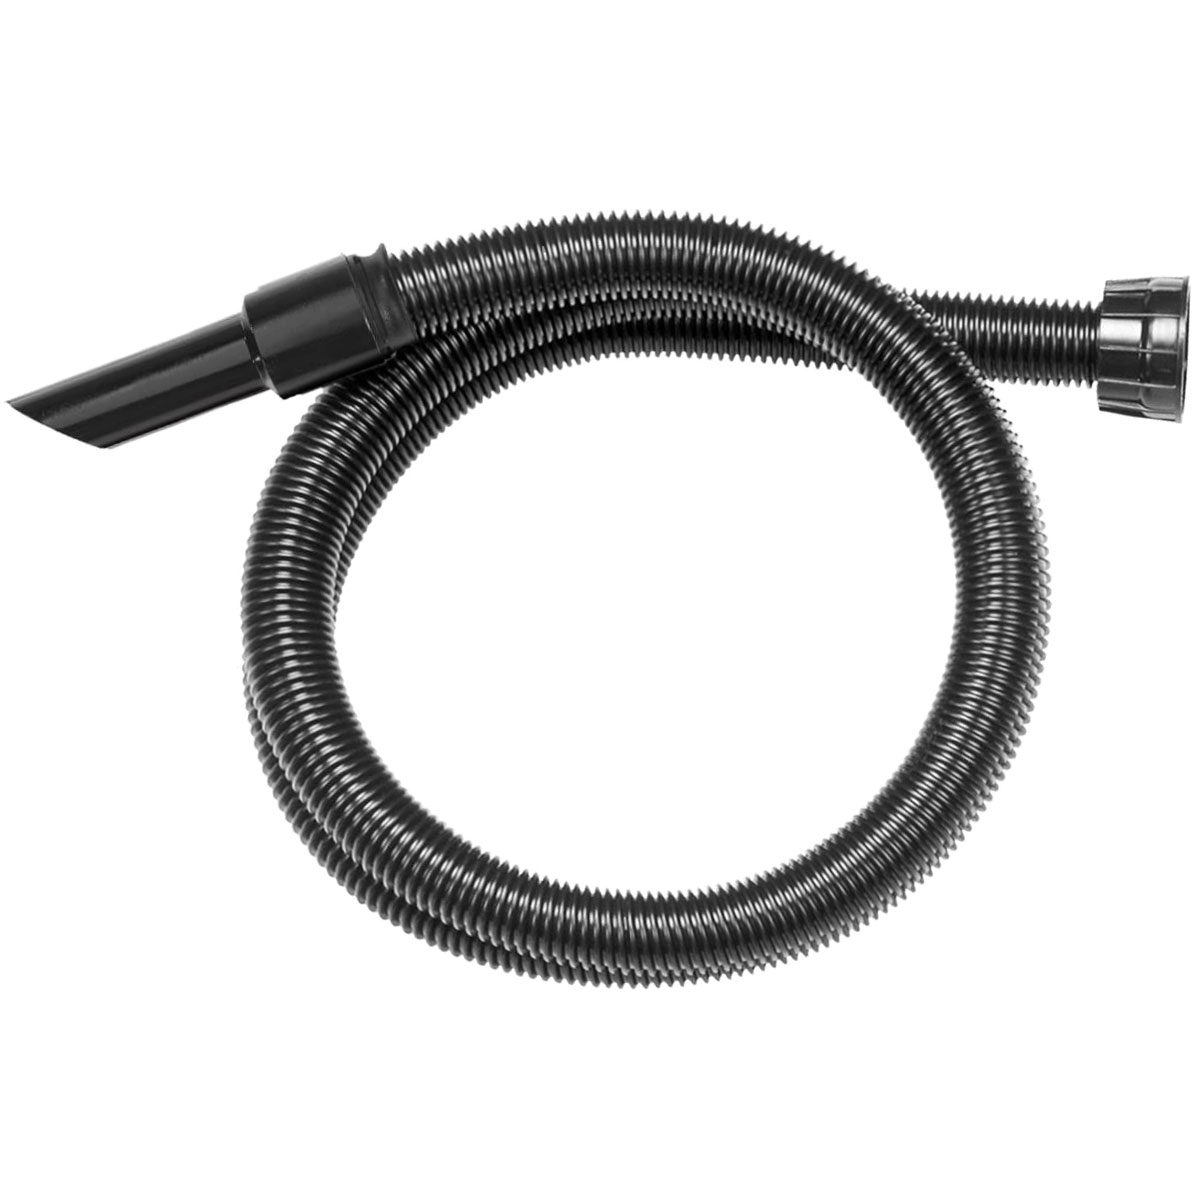 Numatic Vac Hose Complete 2.2m x 32mm (For Henry & Hetty)